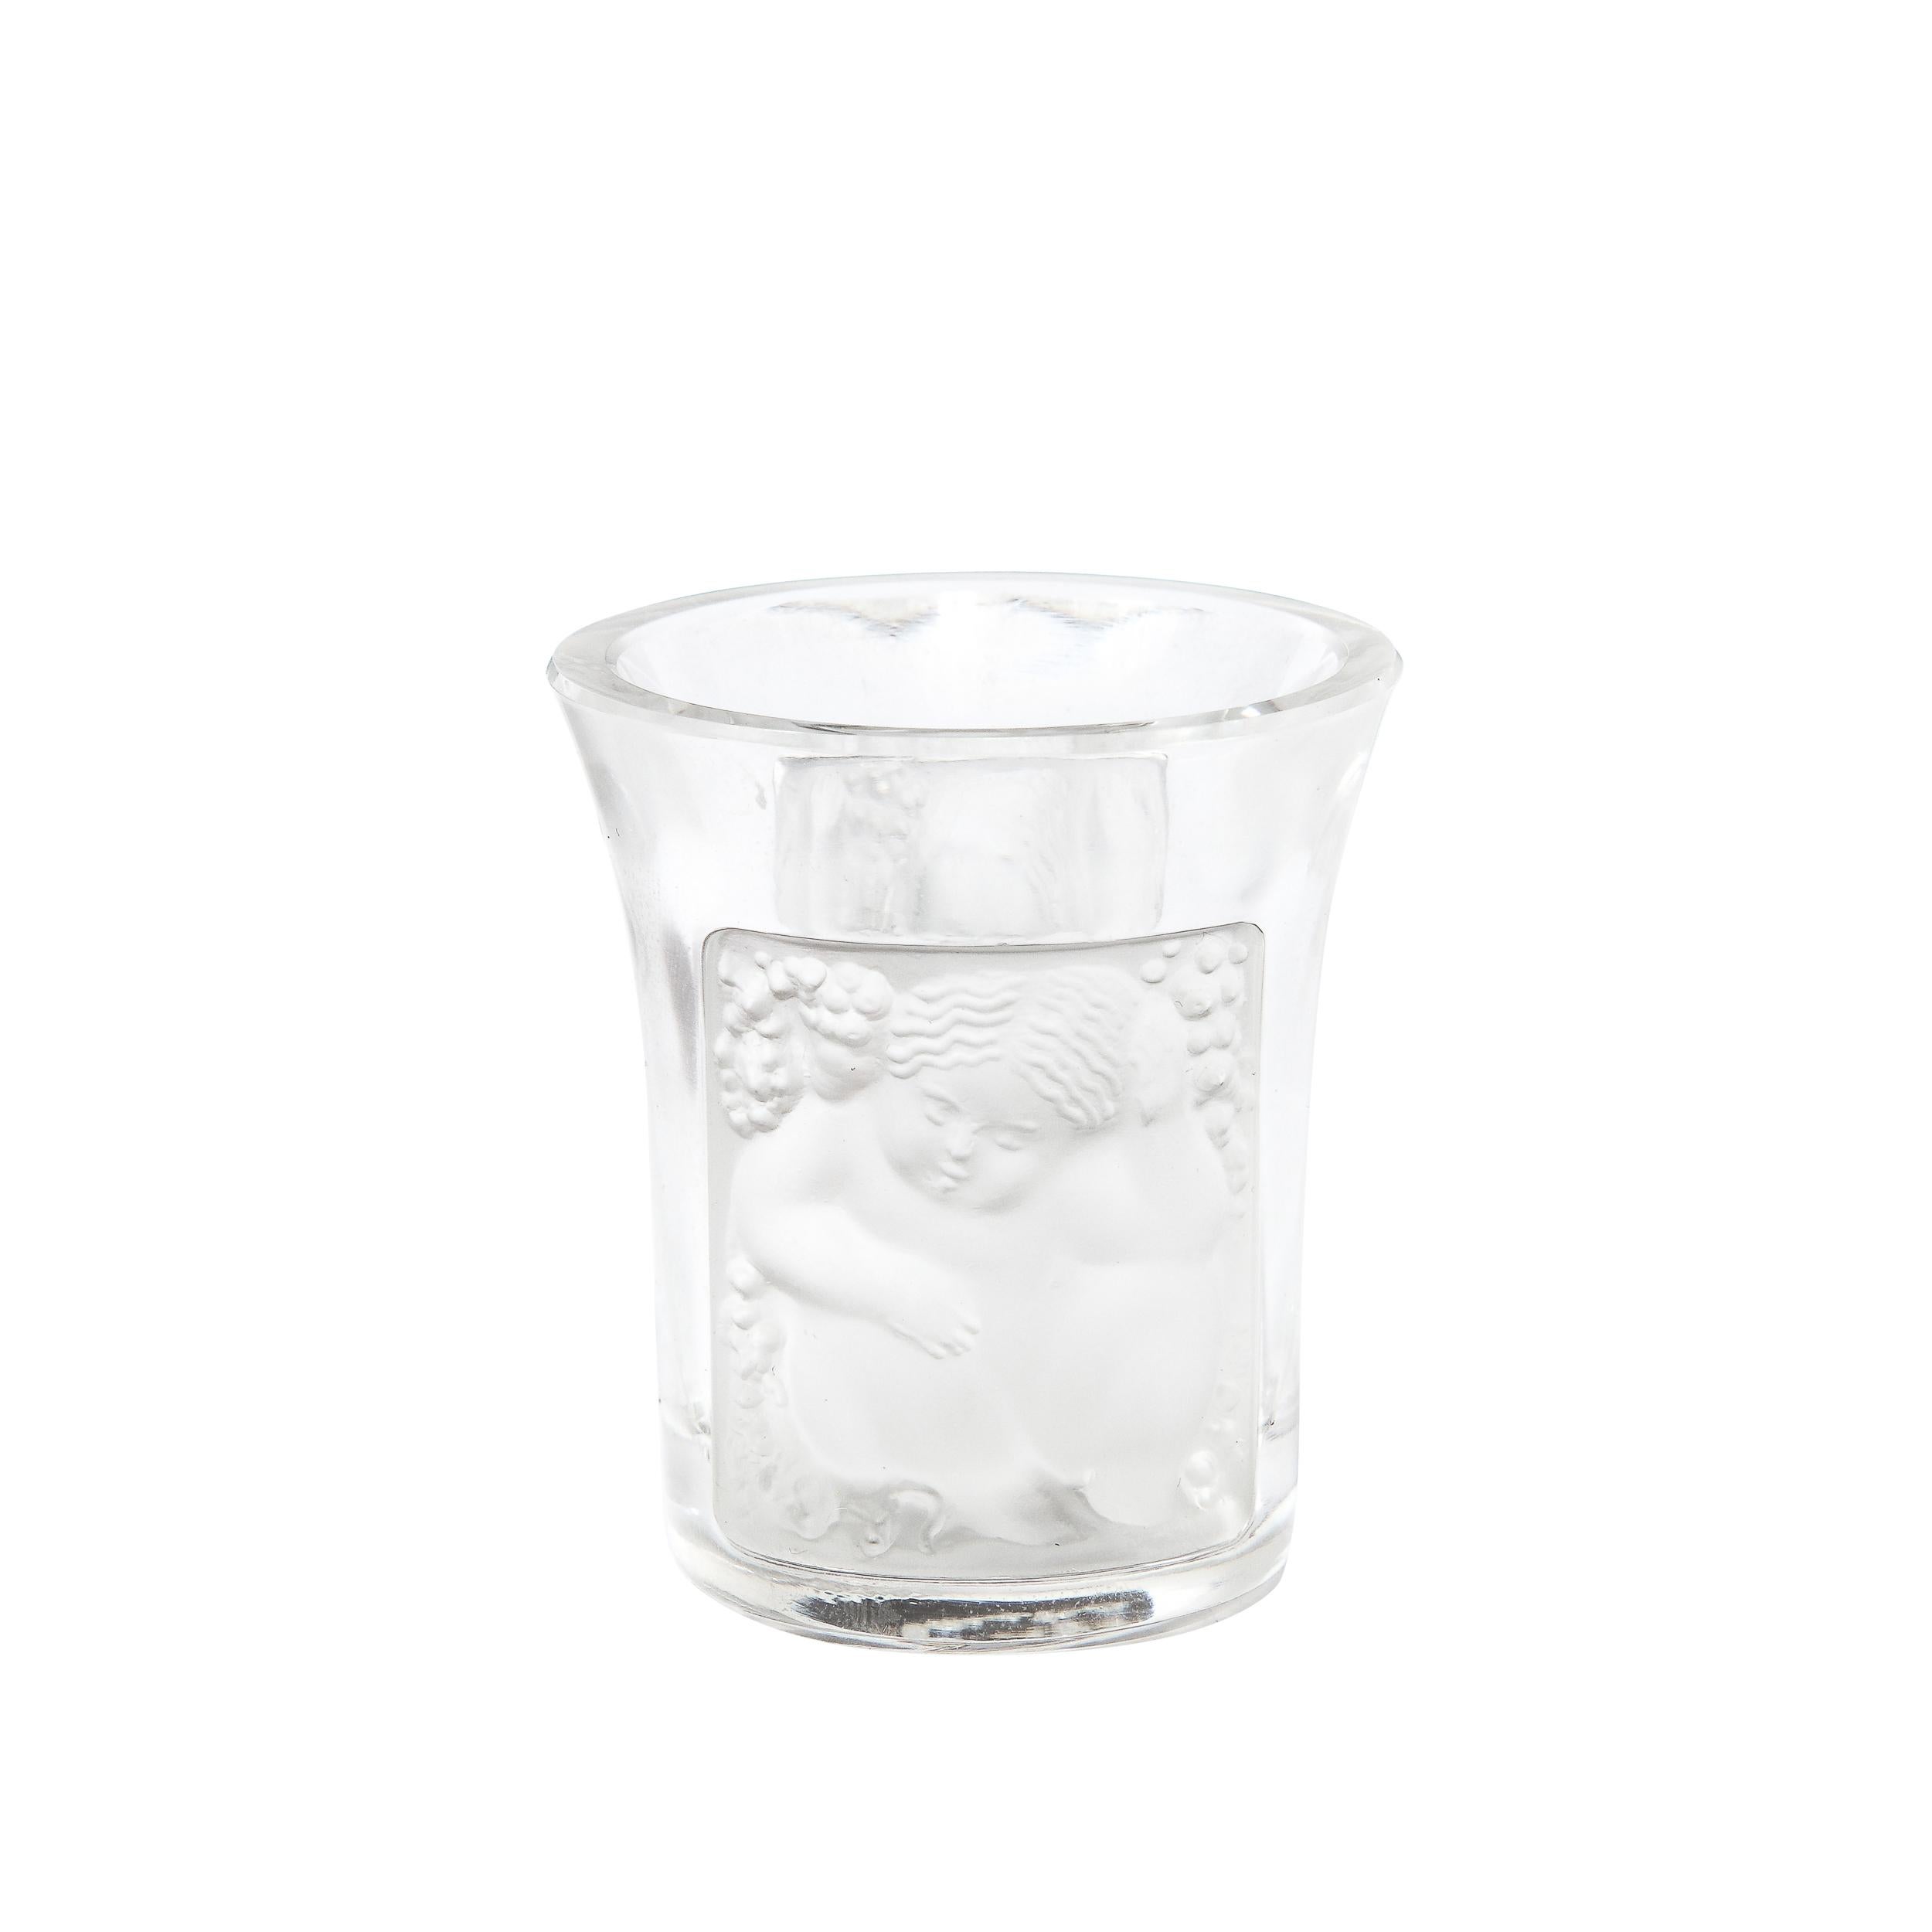 This Art Deco Shot Glass originates from France, Circa 1925. A charming piece rendered in frosted and translucent glass with a subtle inward curve sports two opposite facing motifs of neoclassical figures adorned with grapes in rounded stage like